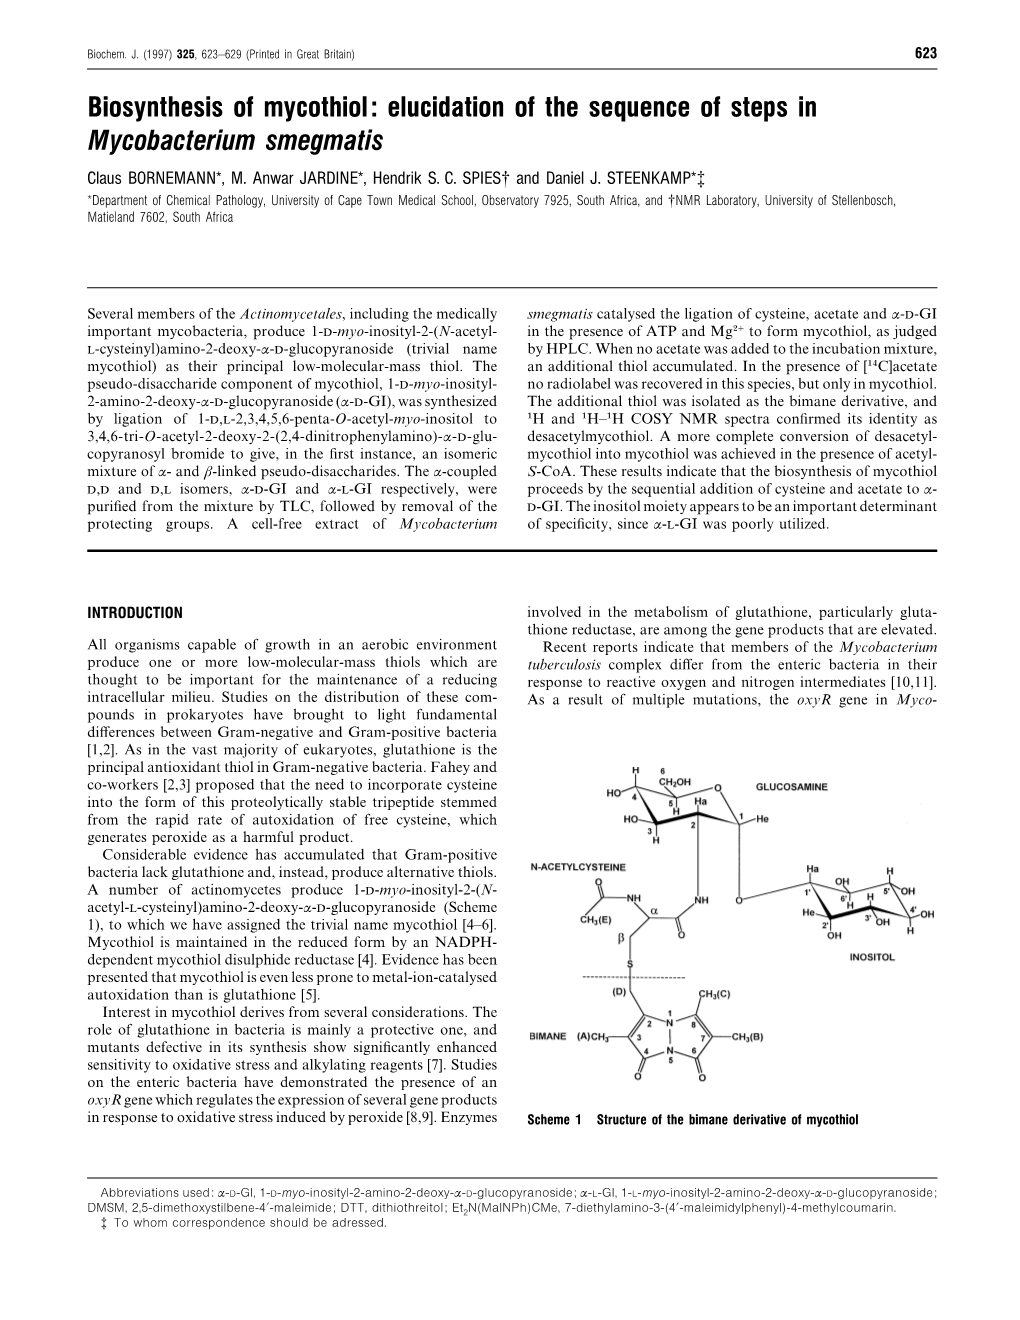 Biosynthesis of Mycothiol: Elucidation of the Sequence of Steps in Mycobacterium Smegmatis Claus BORNEMANN*, M